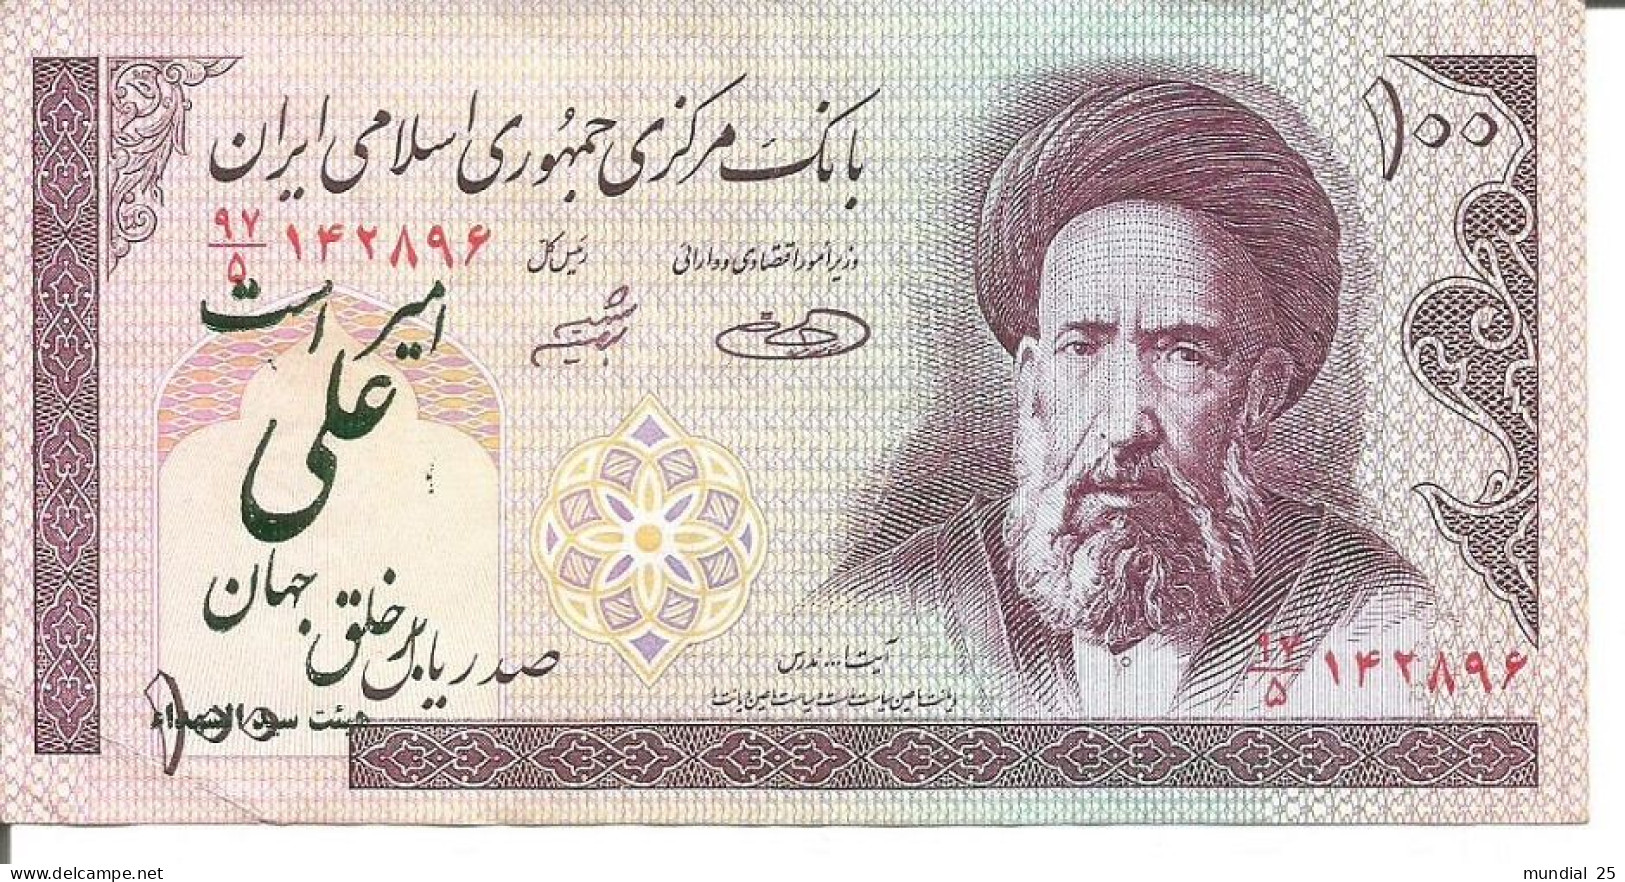 2 IRAN NOTES 100 RIALS (WITH SEAL, ALL DIFFERENT) N/D - Iran